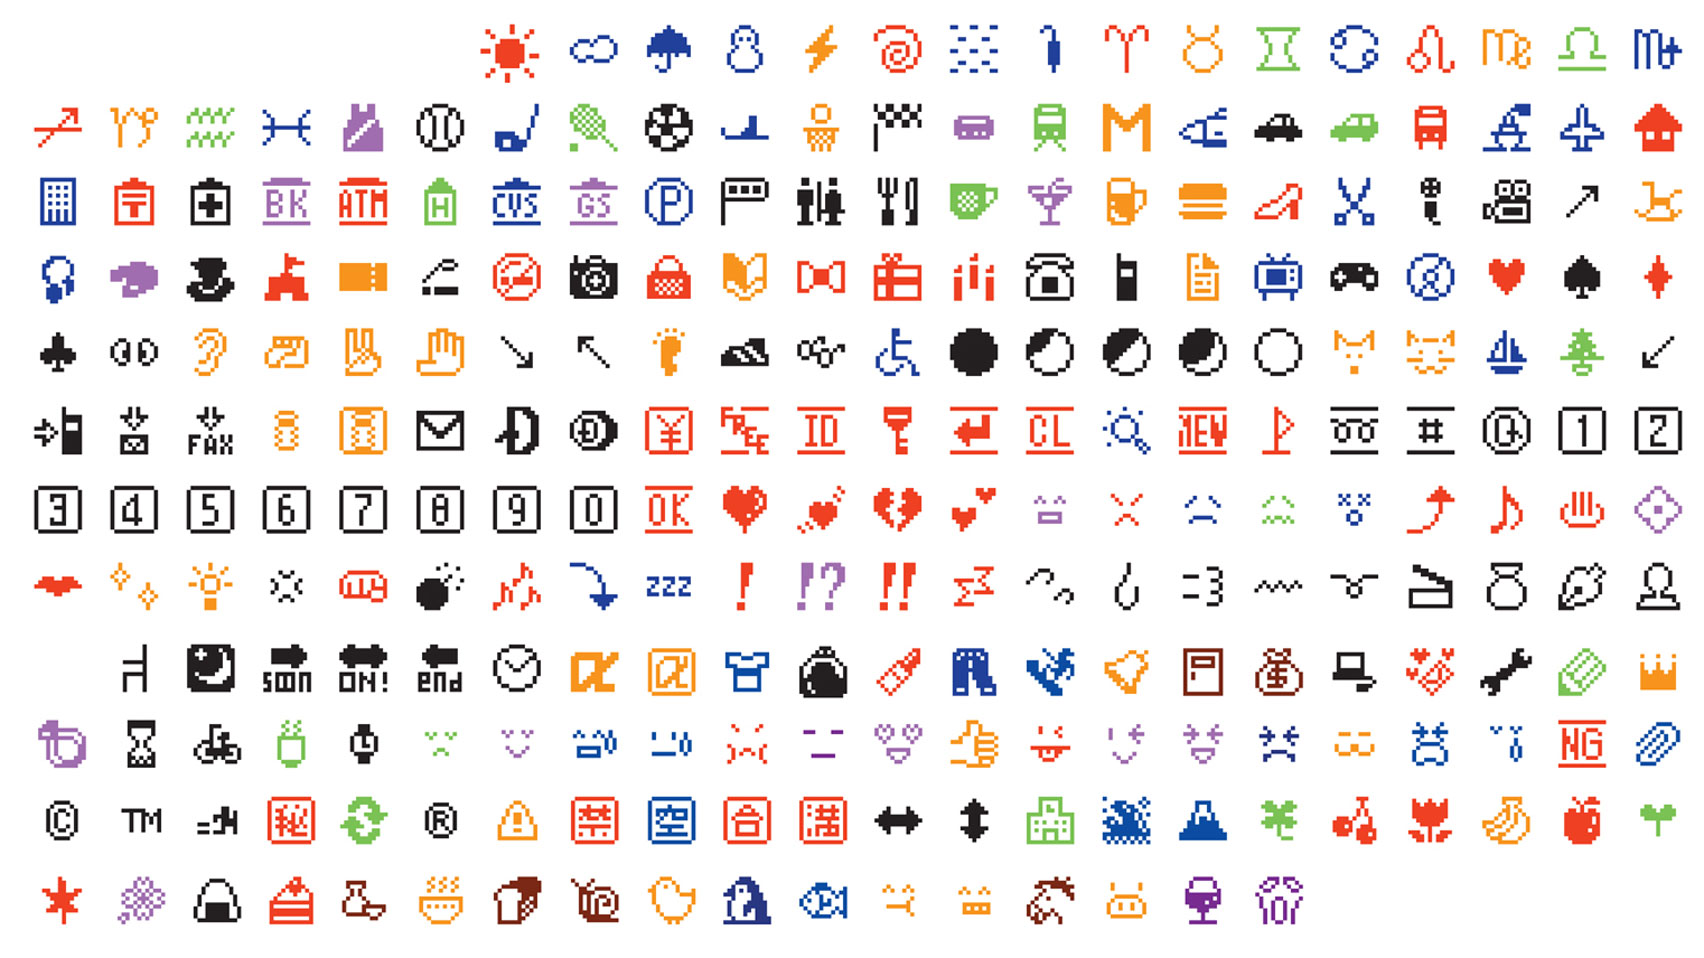 The original set of emojis designed by Shigetaka Kurita, which were first released on a mobile phone in 1999.